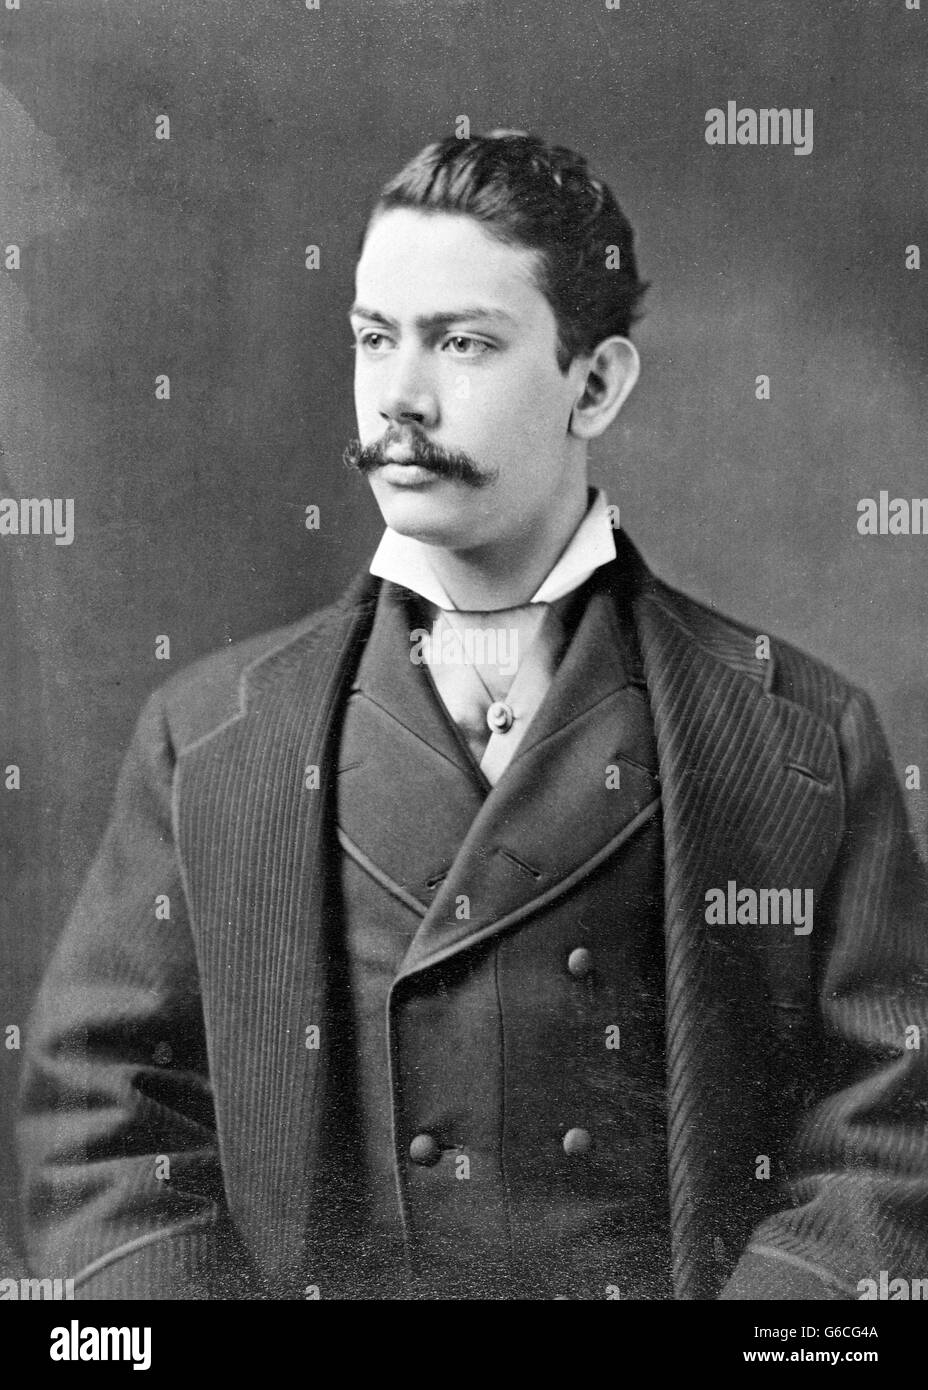 1890s TURN OF THE 20TH CENTURY PORTRAIT MAN WEARING THREE PIECE SUIT WING COLLAR AND CRAVAT Stock Photo